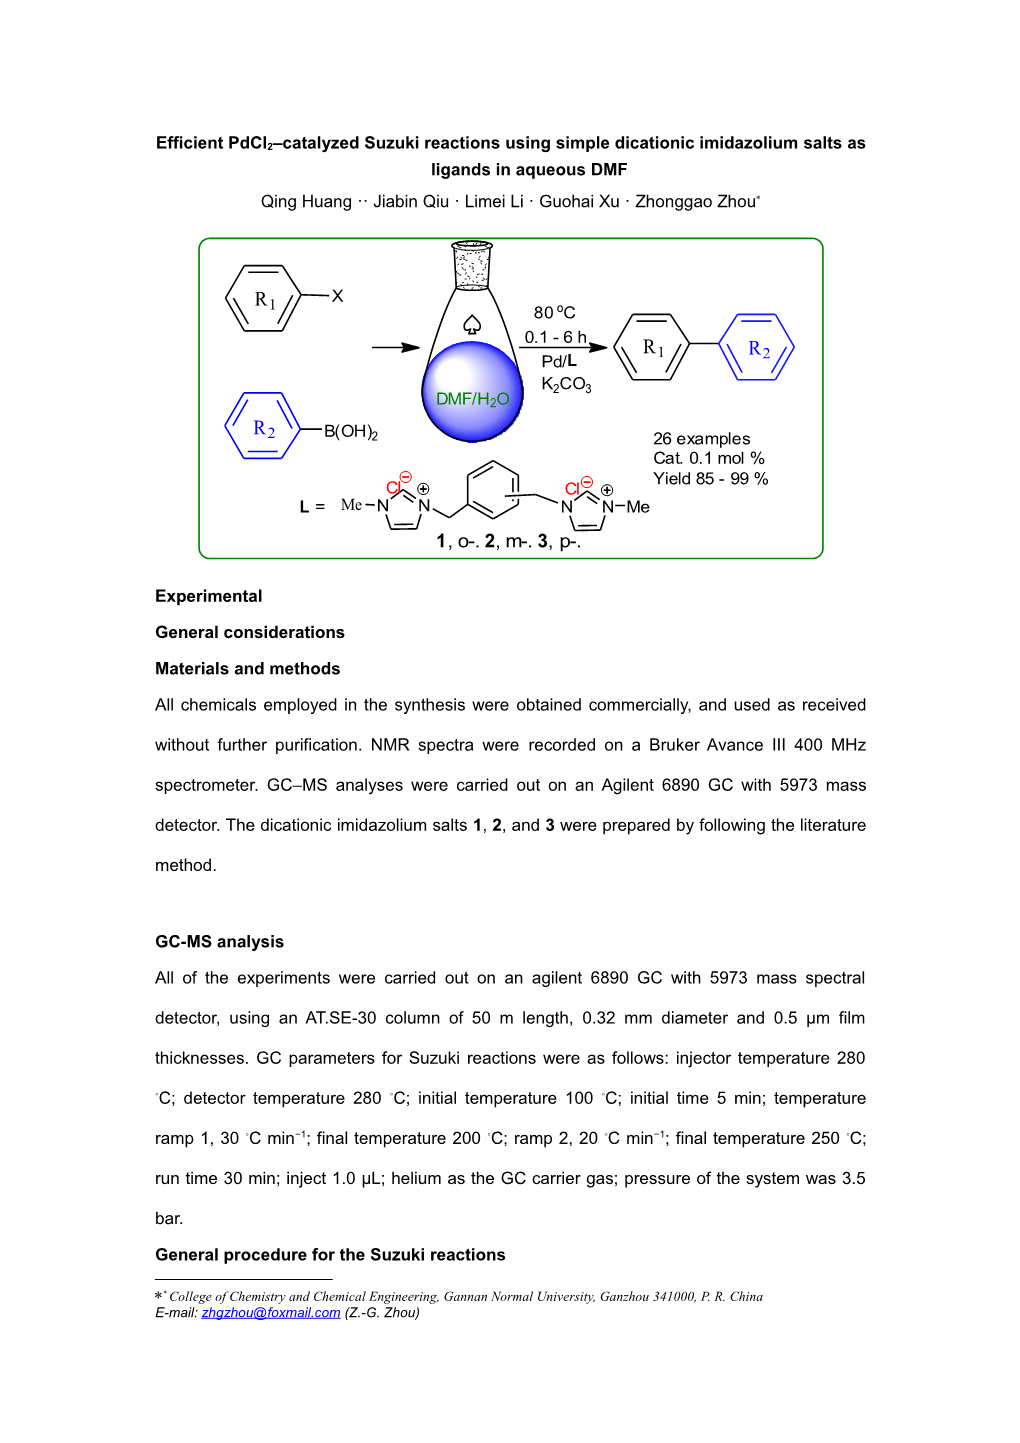 Poly(Ethylene Glycol)-Functionalized N-Heterocyclic Carbene Ligands for Efficient Pd-Catalyzed